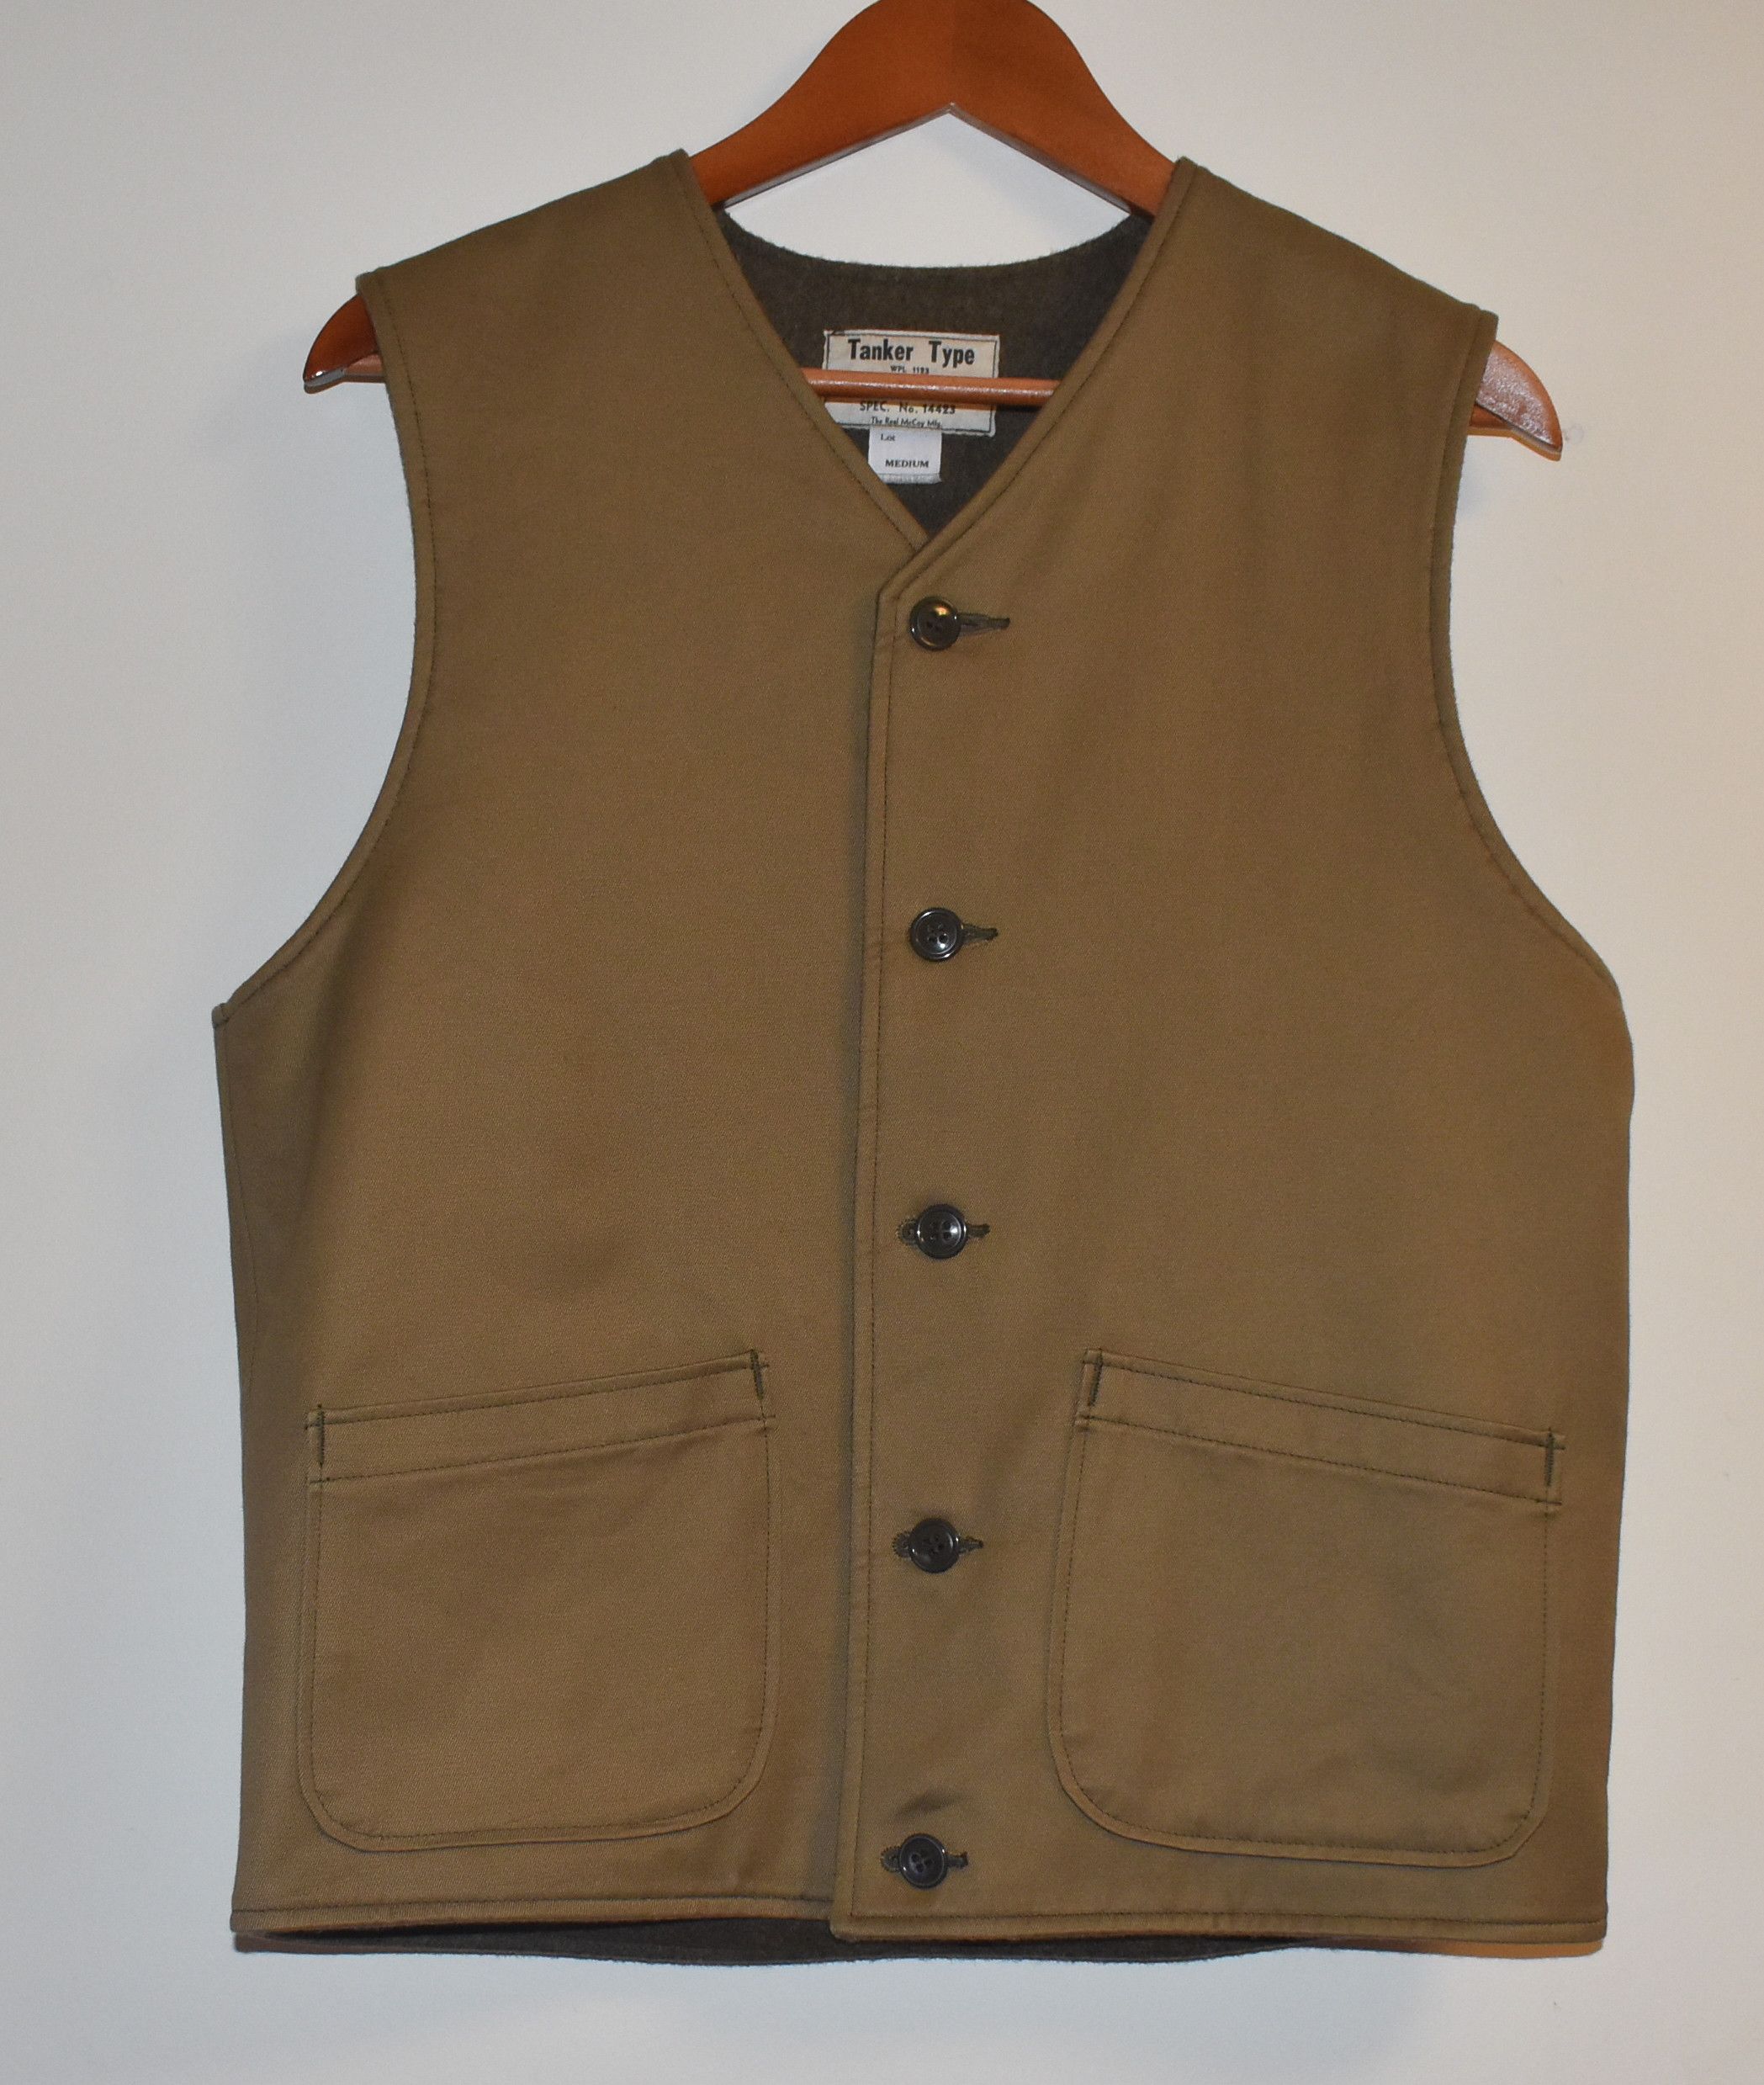 The Real McCoy's WWII Tanker Vest | Grailed